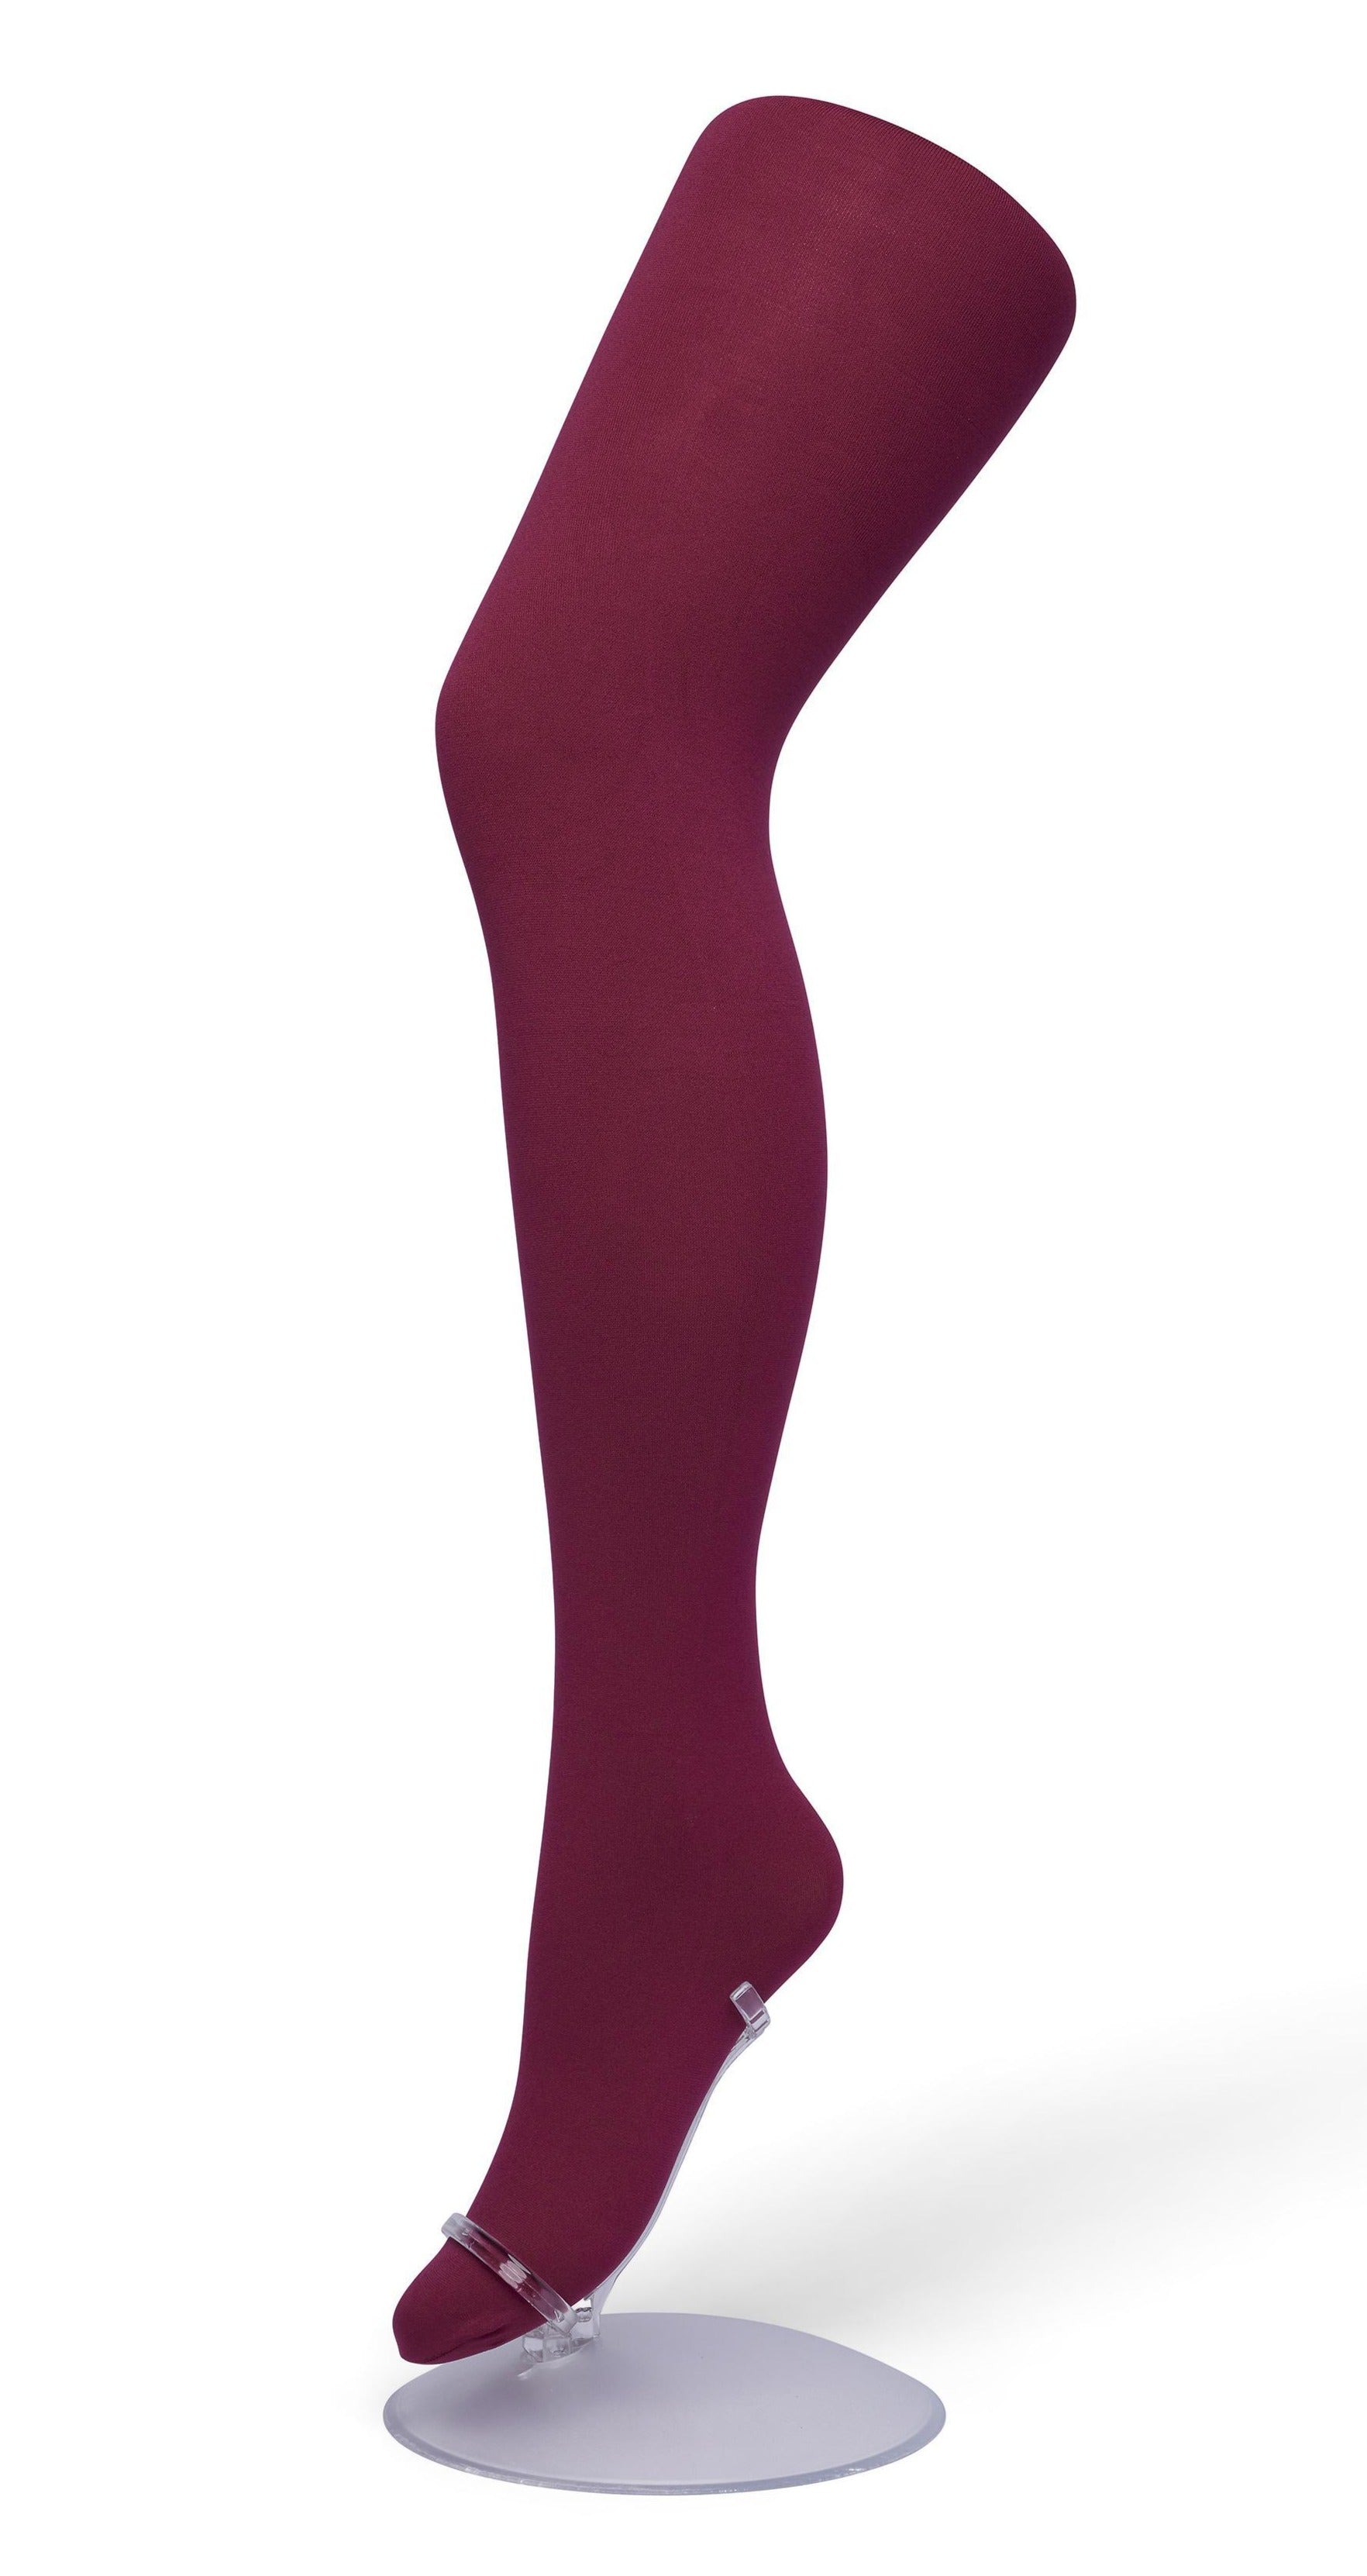 Bonnie Doon BN161912 Comfort Tights XXL - Wine (rhododendron) 70 denier soft opaque plus size tights with an extra panel in the body, extra deep waistband and flat seams.